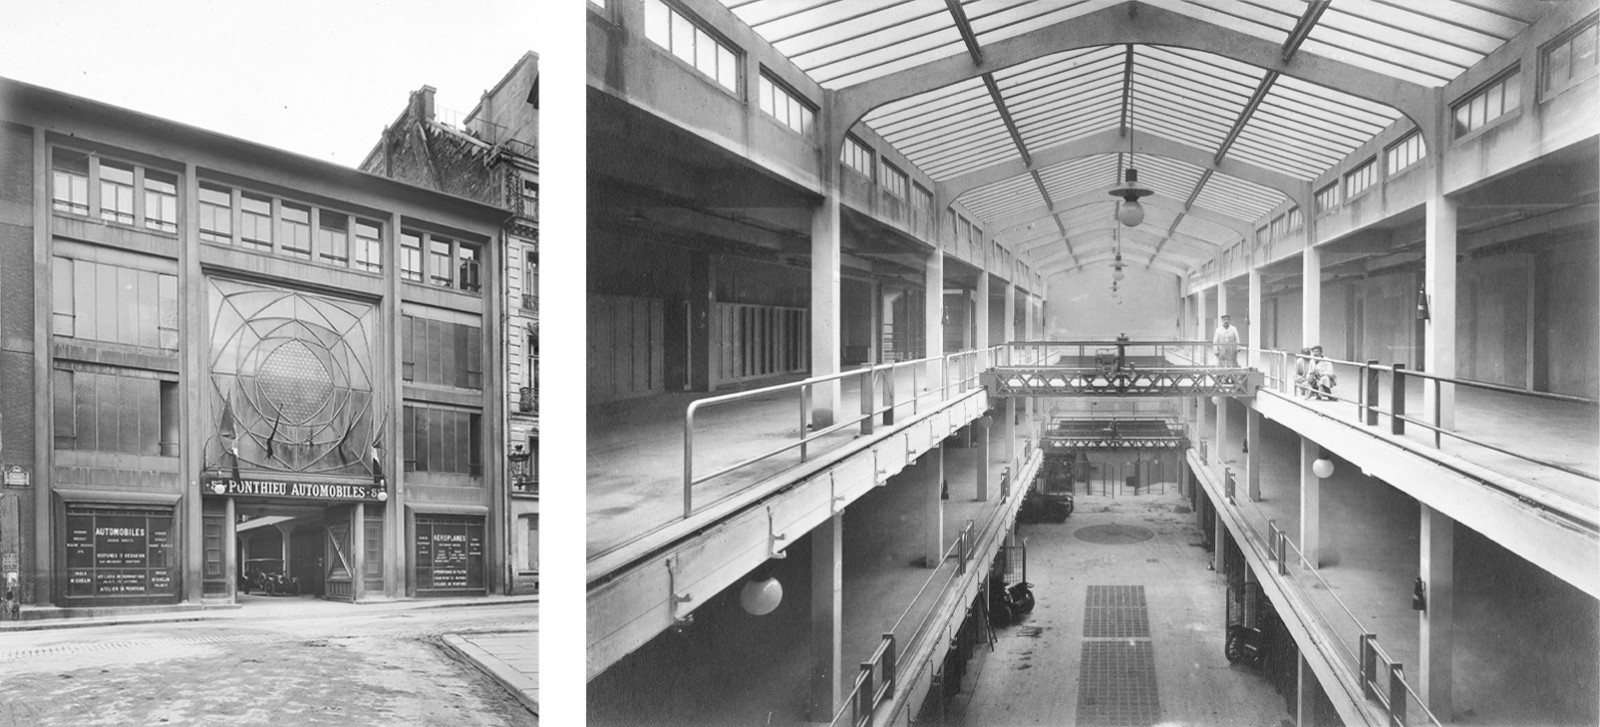 Ponthieu-Automobiles. Exterior view and interior view in line with the central nave at the back of the plot. Photography by Union photographique française − Around 1907 © Cnam / Siaf / Capa / Architecture archives of the XXe sc Auguste Perret / UFSE / SAIF / 2018